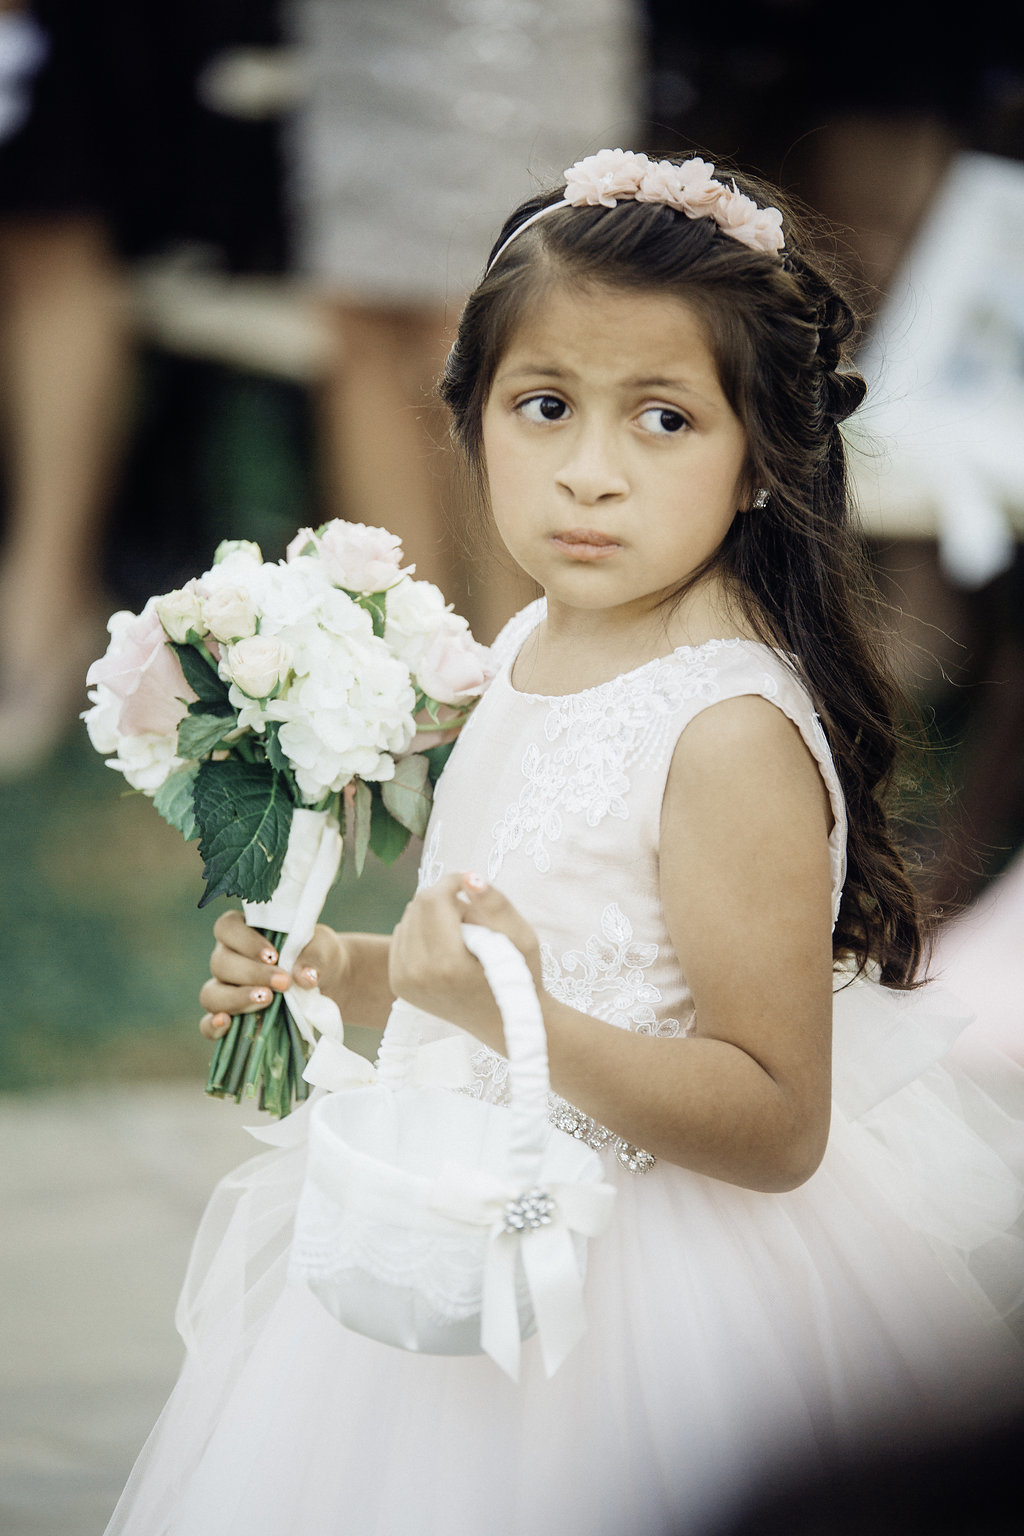 Wedding Photograph Of Flower Girl Carrying a Bouquet Los Angeles